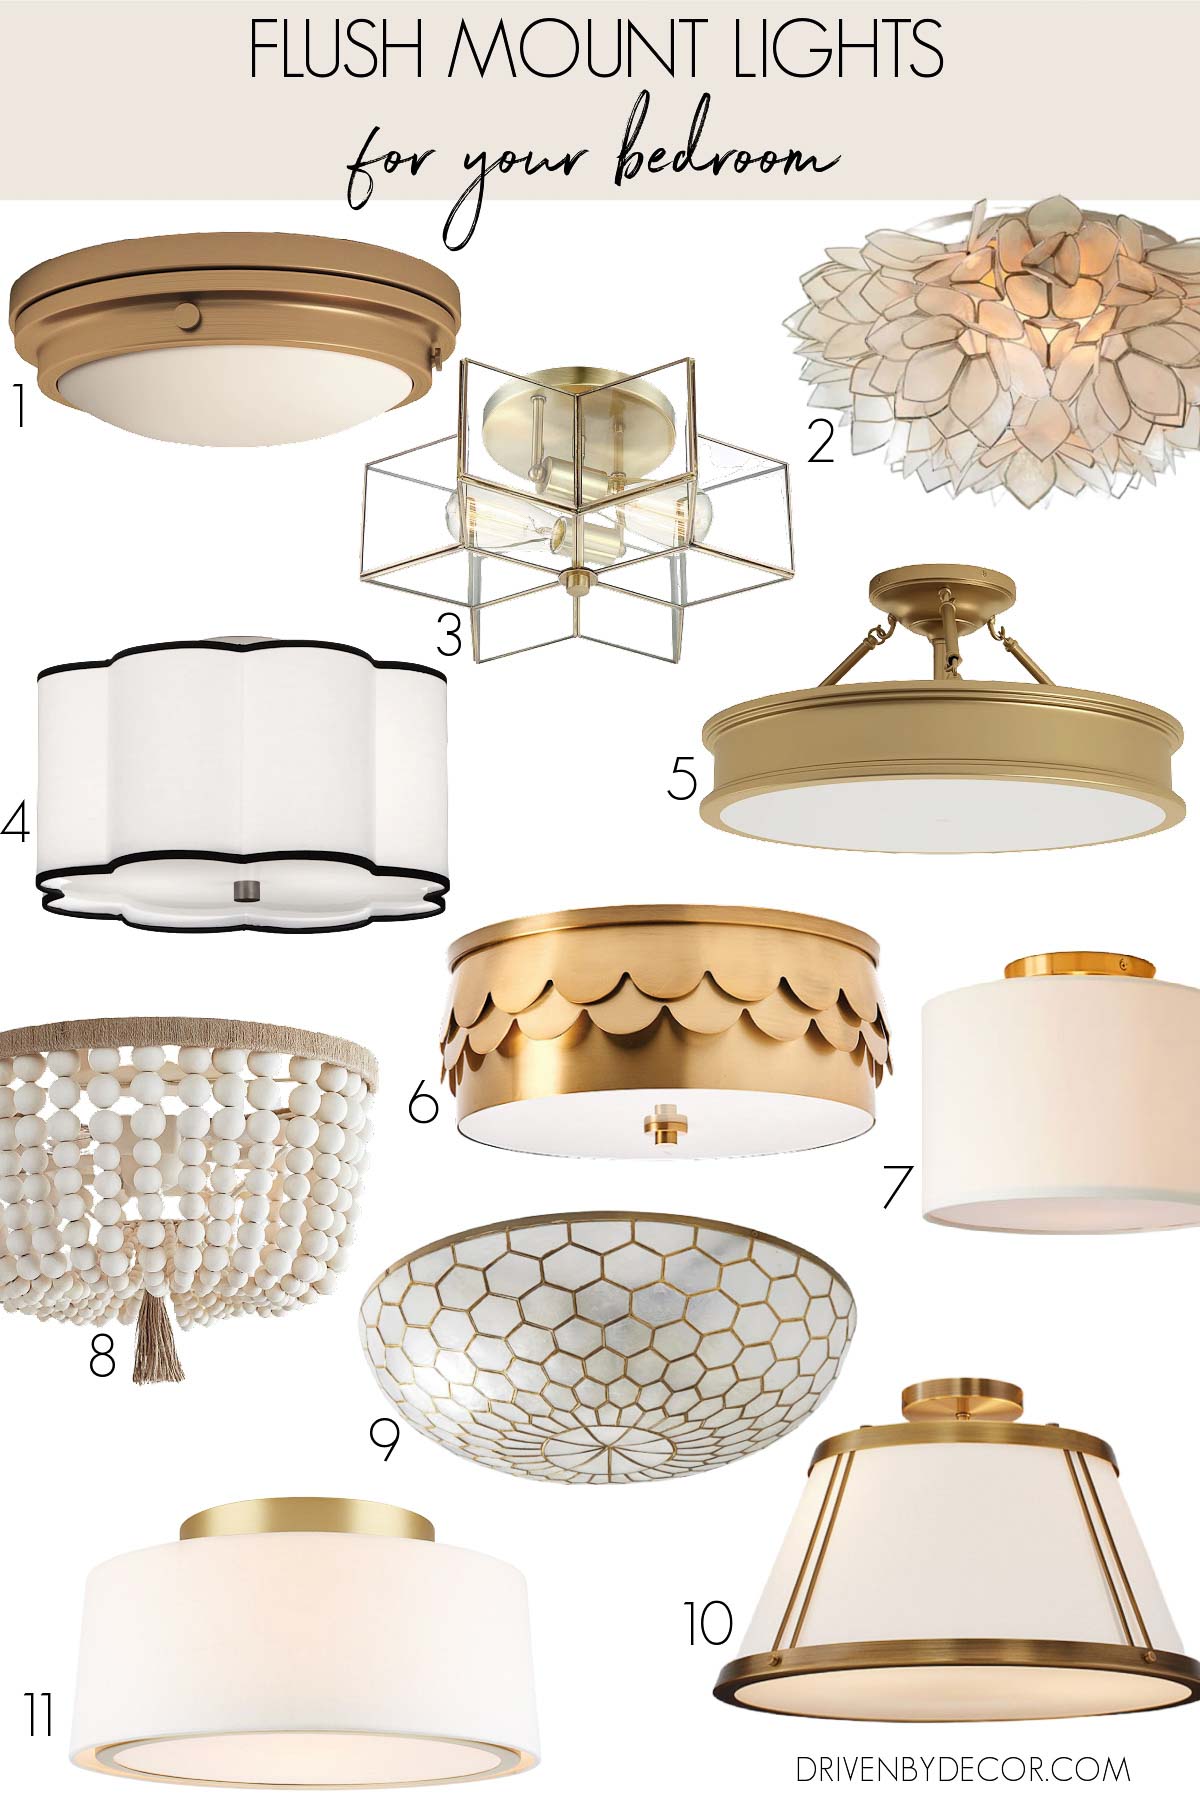 Bedroom Light Fixtures: The Complete Guide! Driven By Decor, 60% OFF